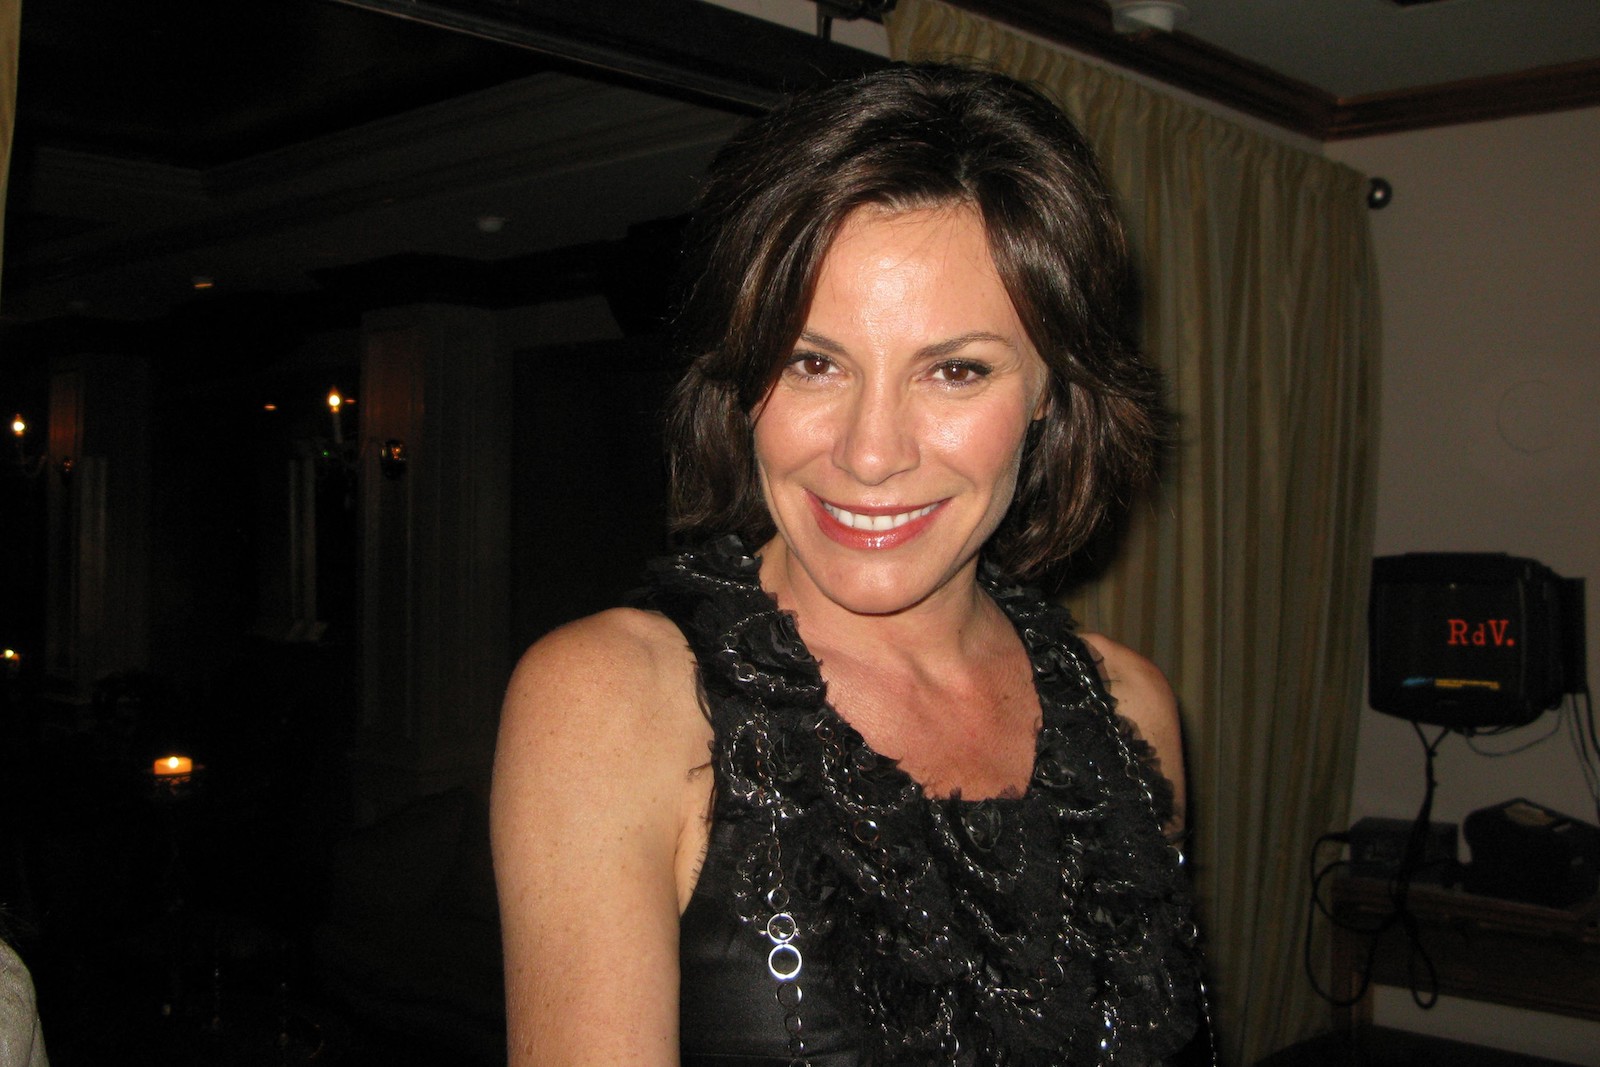 Luann de Lesseps from RHONY at a party